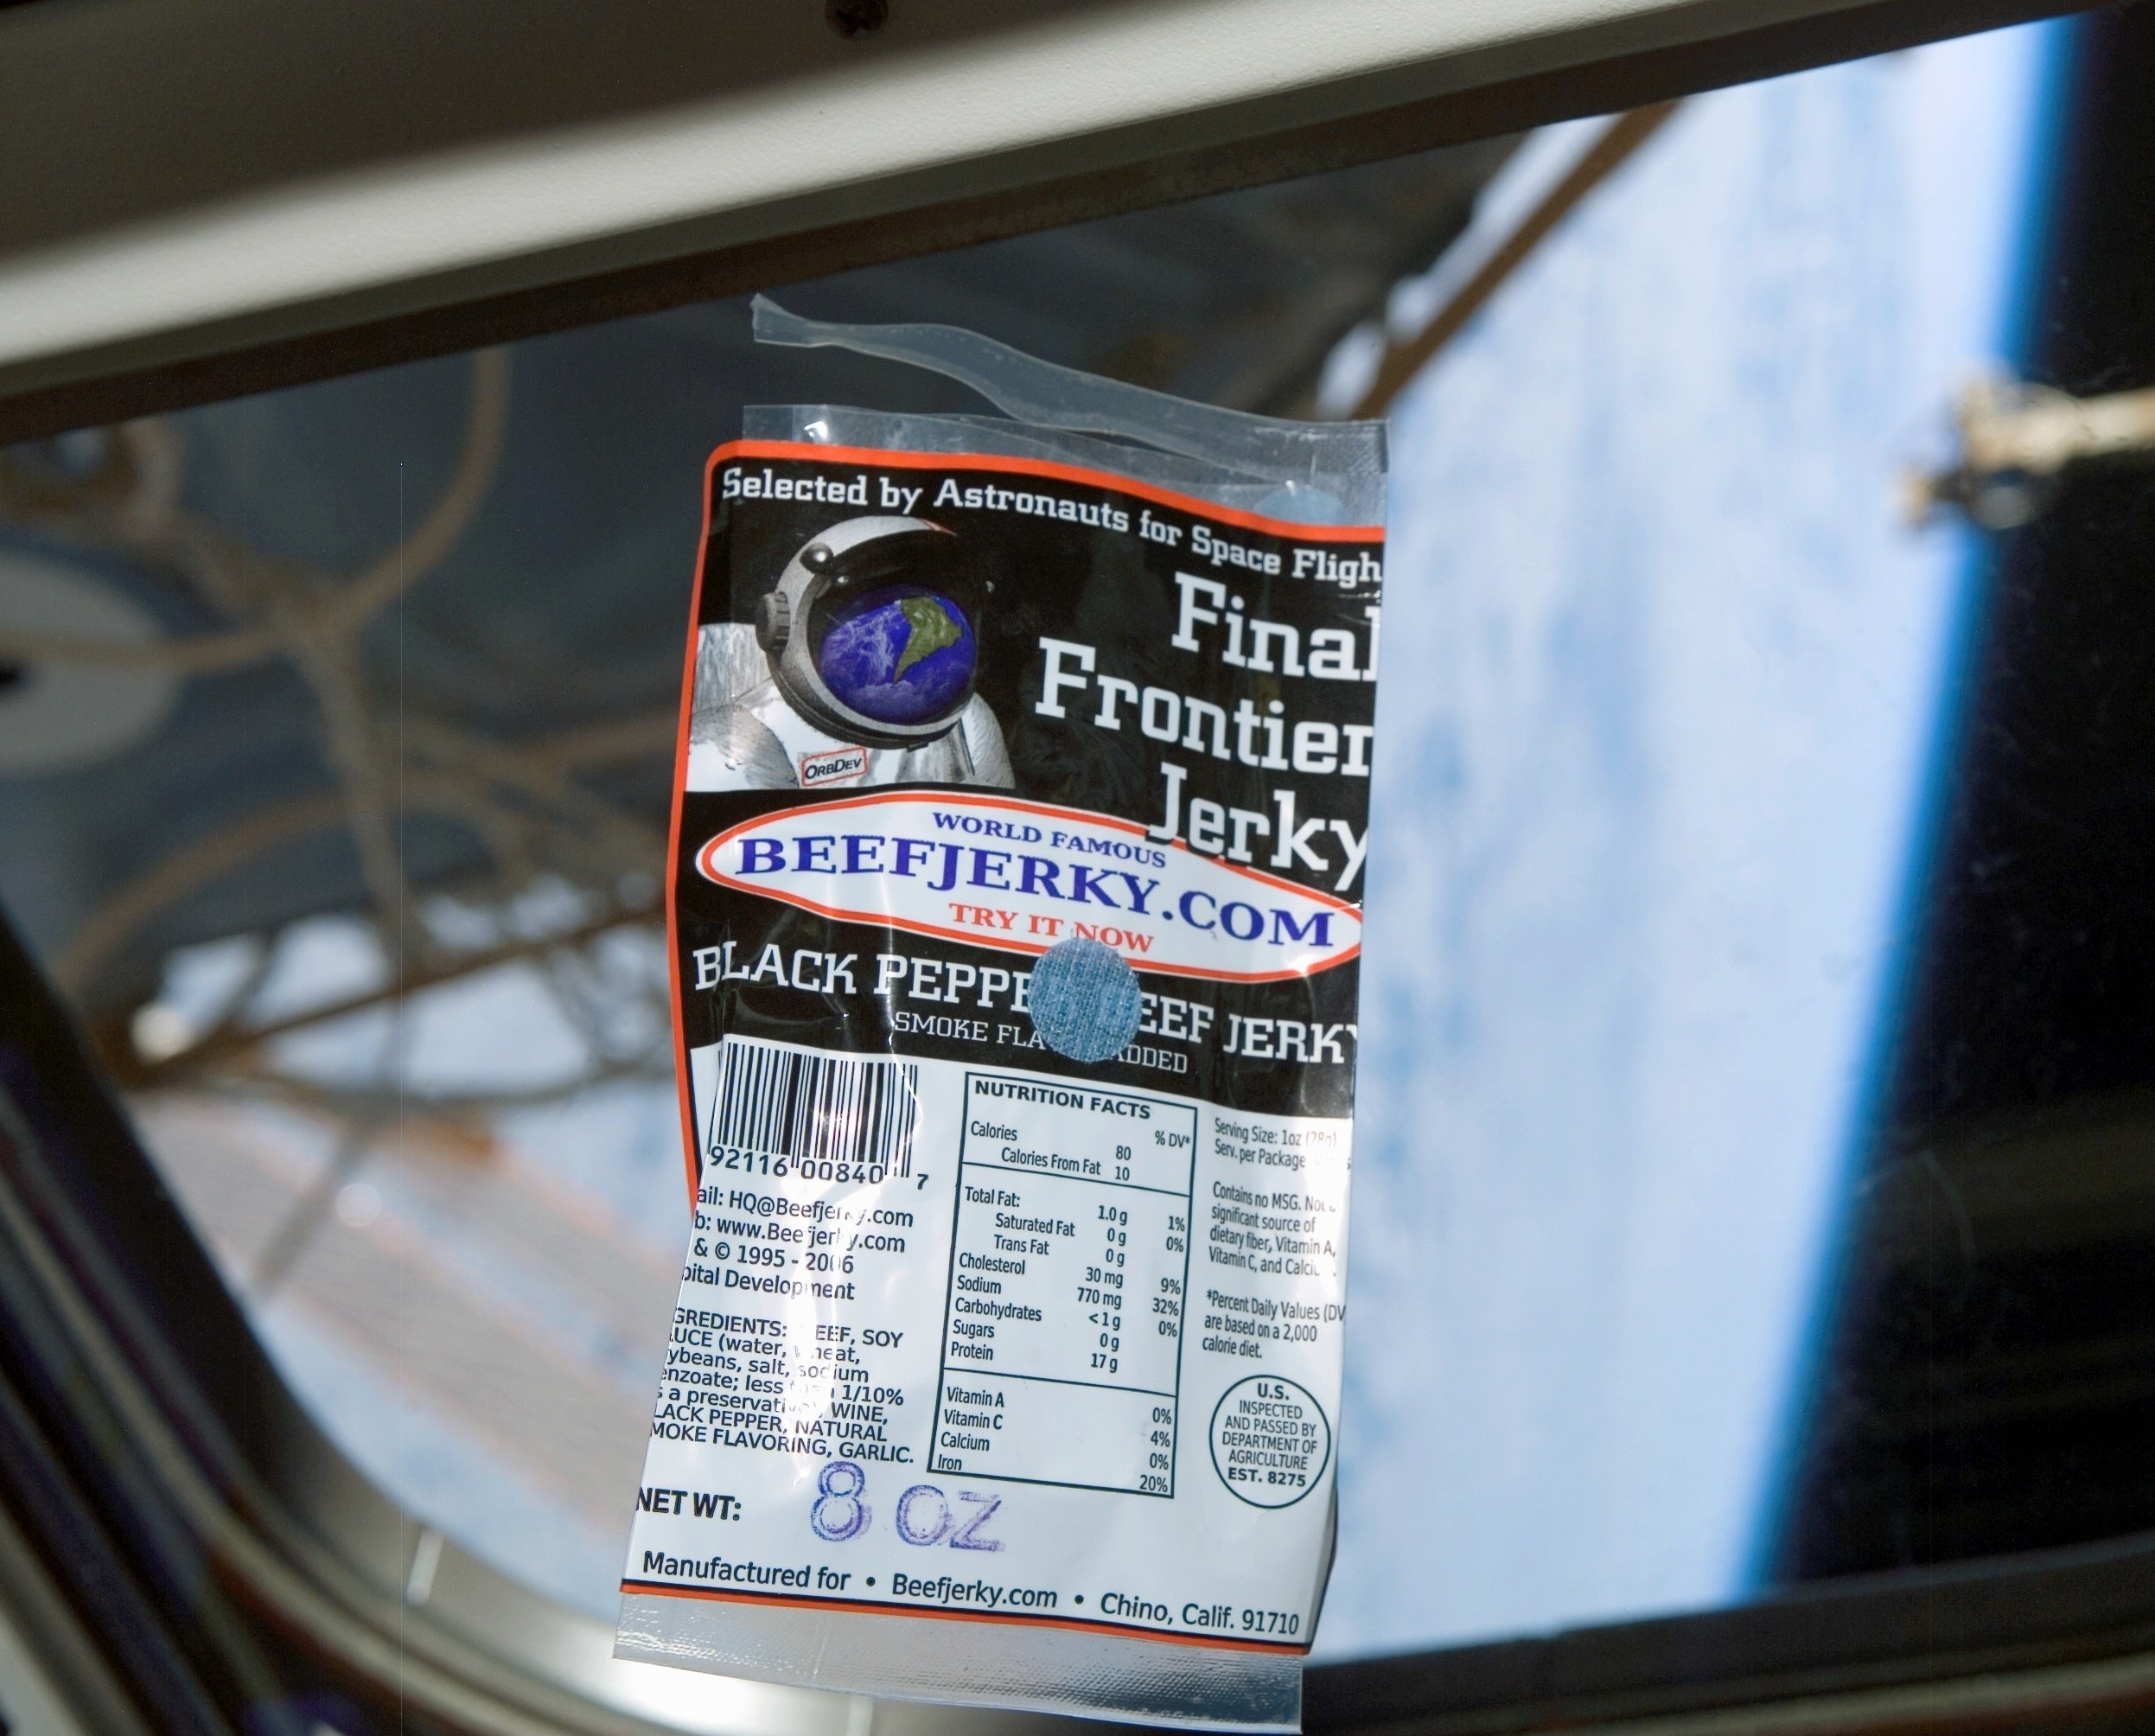 Beef Jerky on International Space Station with Earth visible out the big window. Carried to ISS aboard STS-118, Endevour Space Shuttle flight.